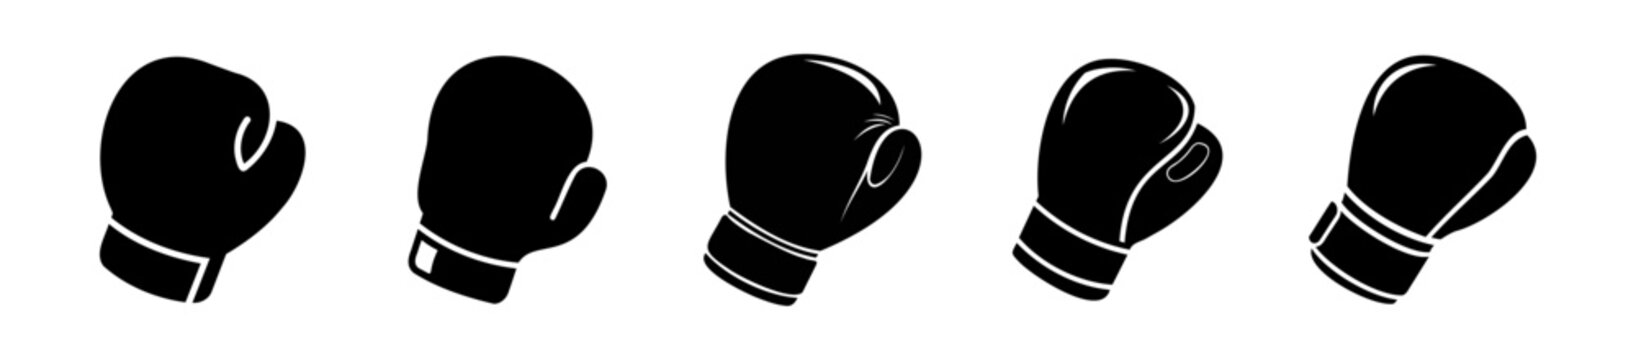 set of black boxing gloves in silhouette. black and white graphic art of sporting gloves. icon, logo